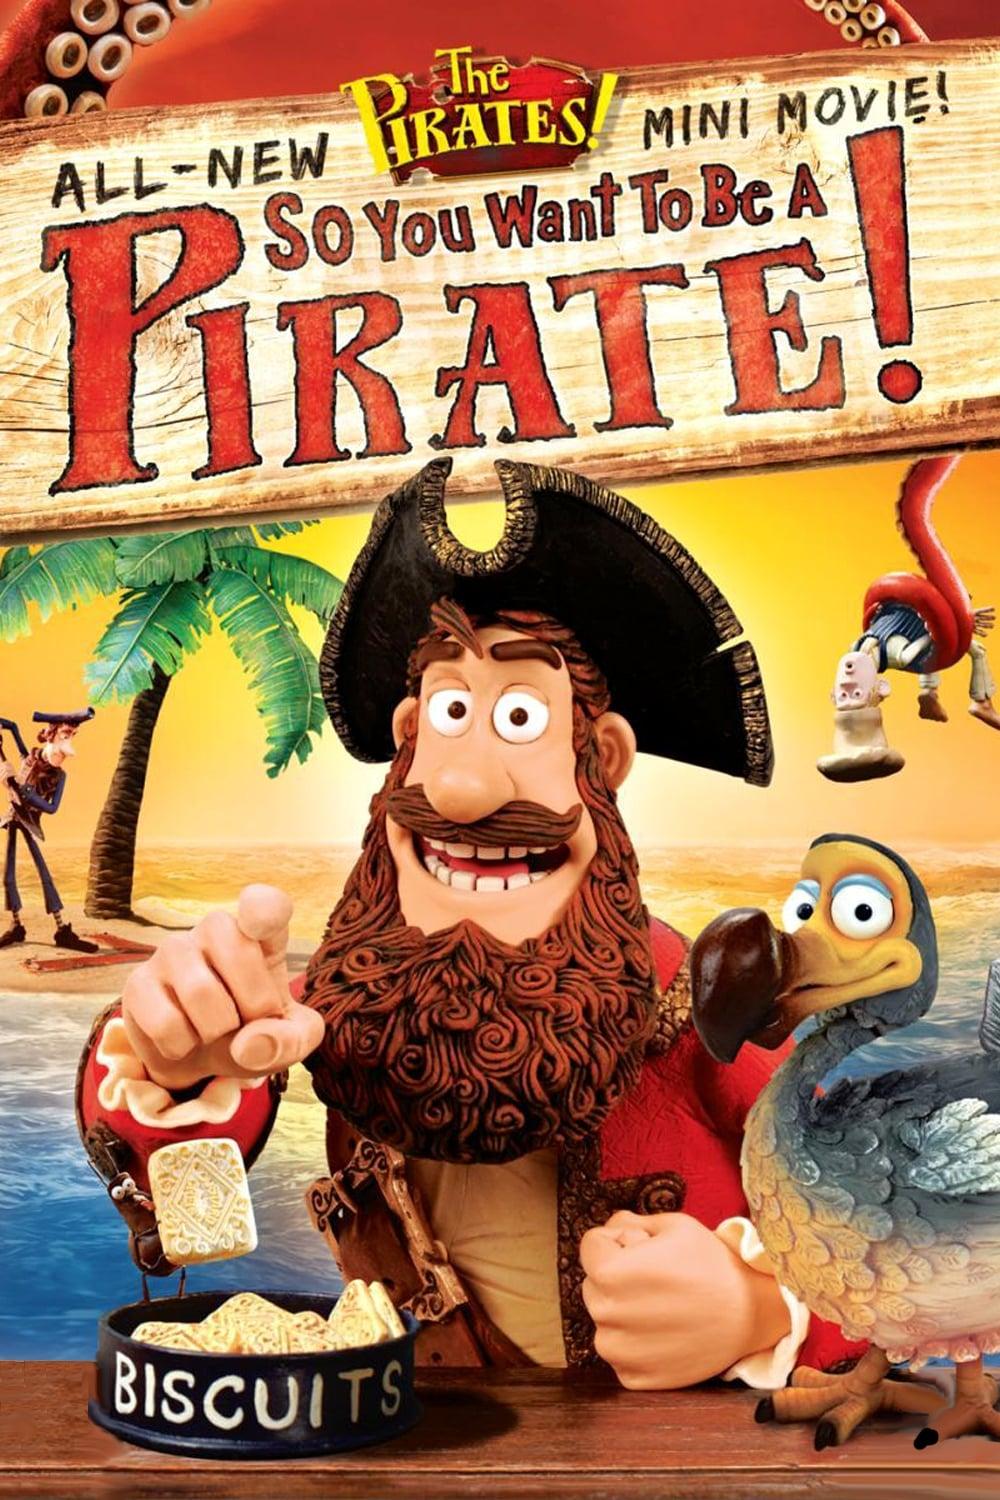 So You Want To Be A Pirate! poster